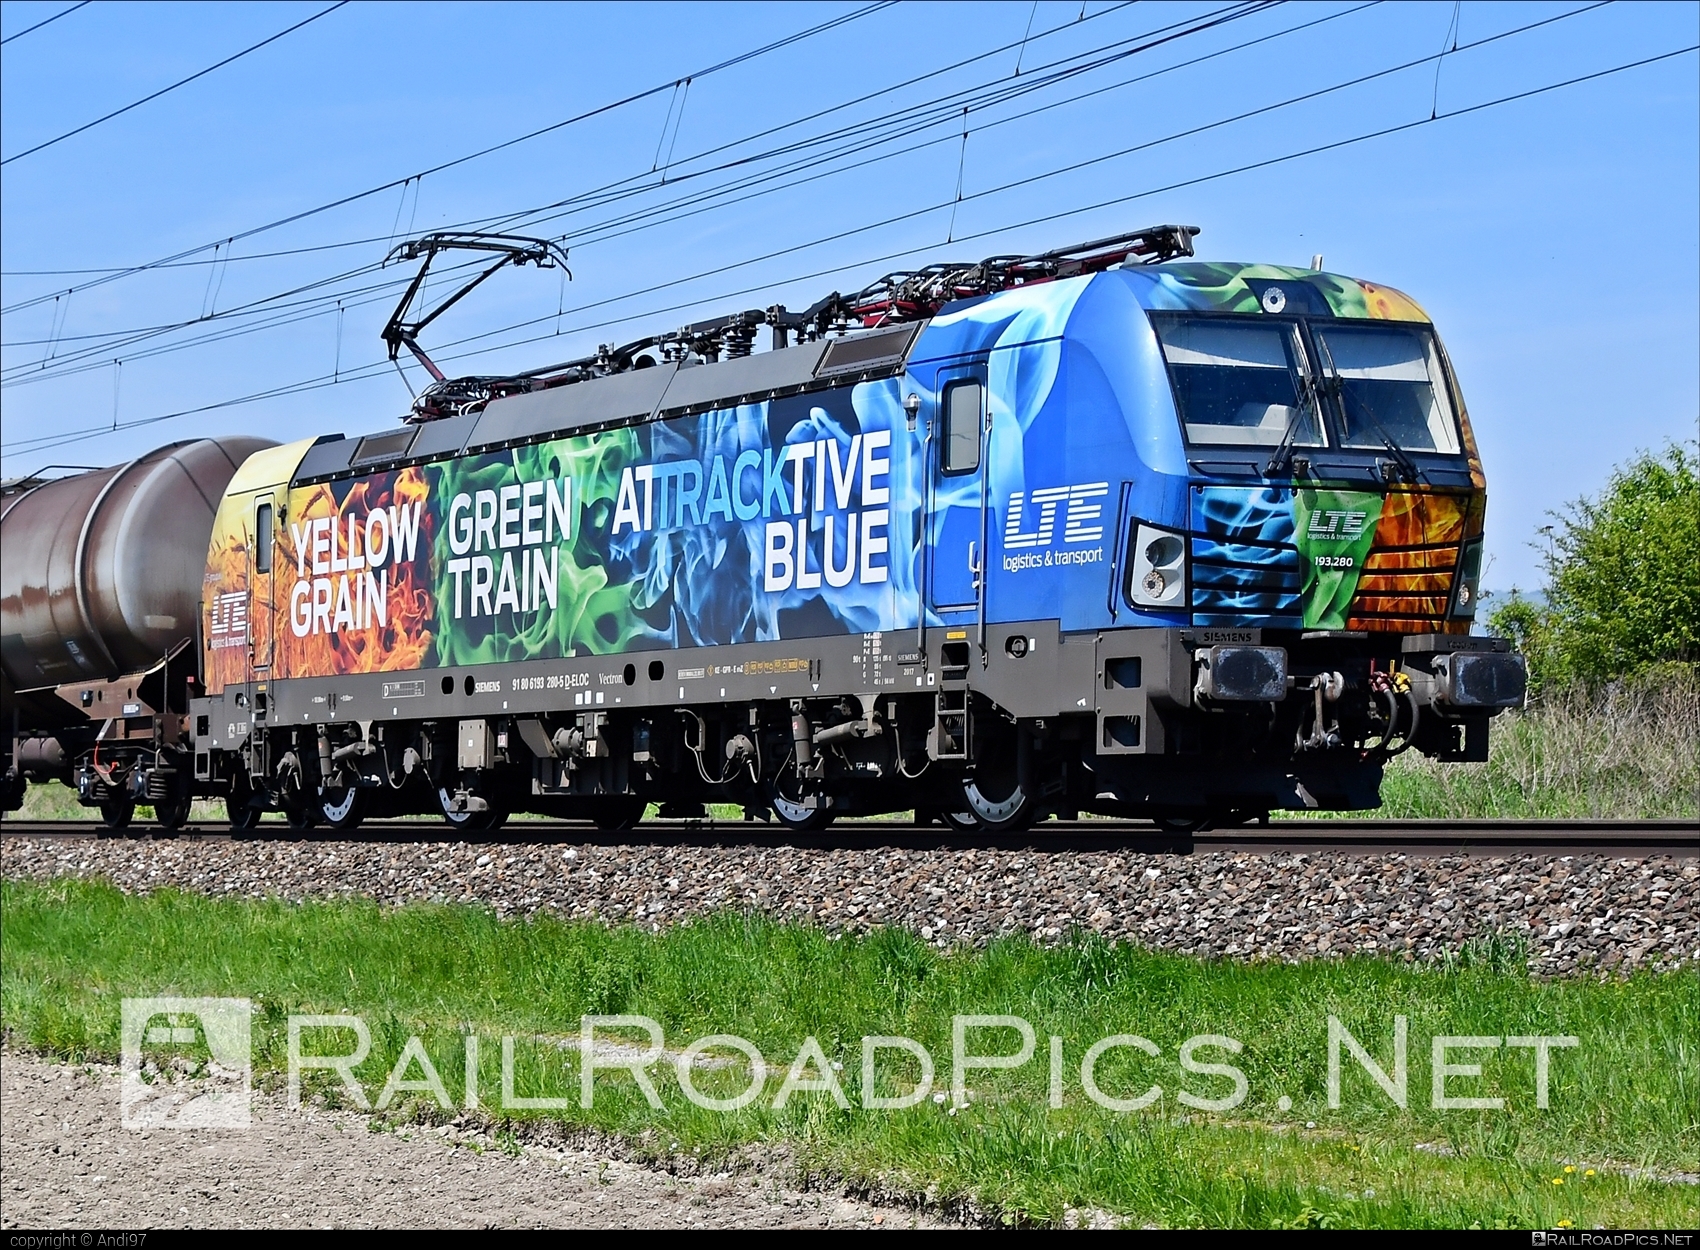 Siemens Vectron MS - 193 280 operated by LTE Logistik und Transport GmbH #ell #ellgermany #eloc #europeanlocomotiveleasing #lte #ltelogistikundtransport #ltelogistikundtransportgmbh #siemens #siemensVectron #siemensVectronMS #vectron #vectronMS